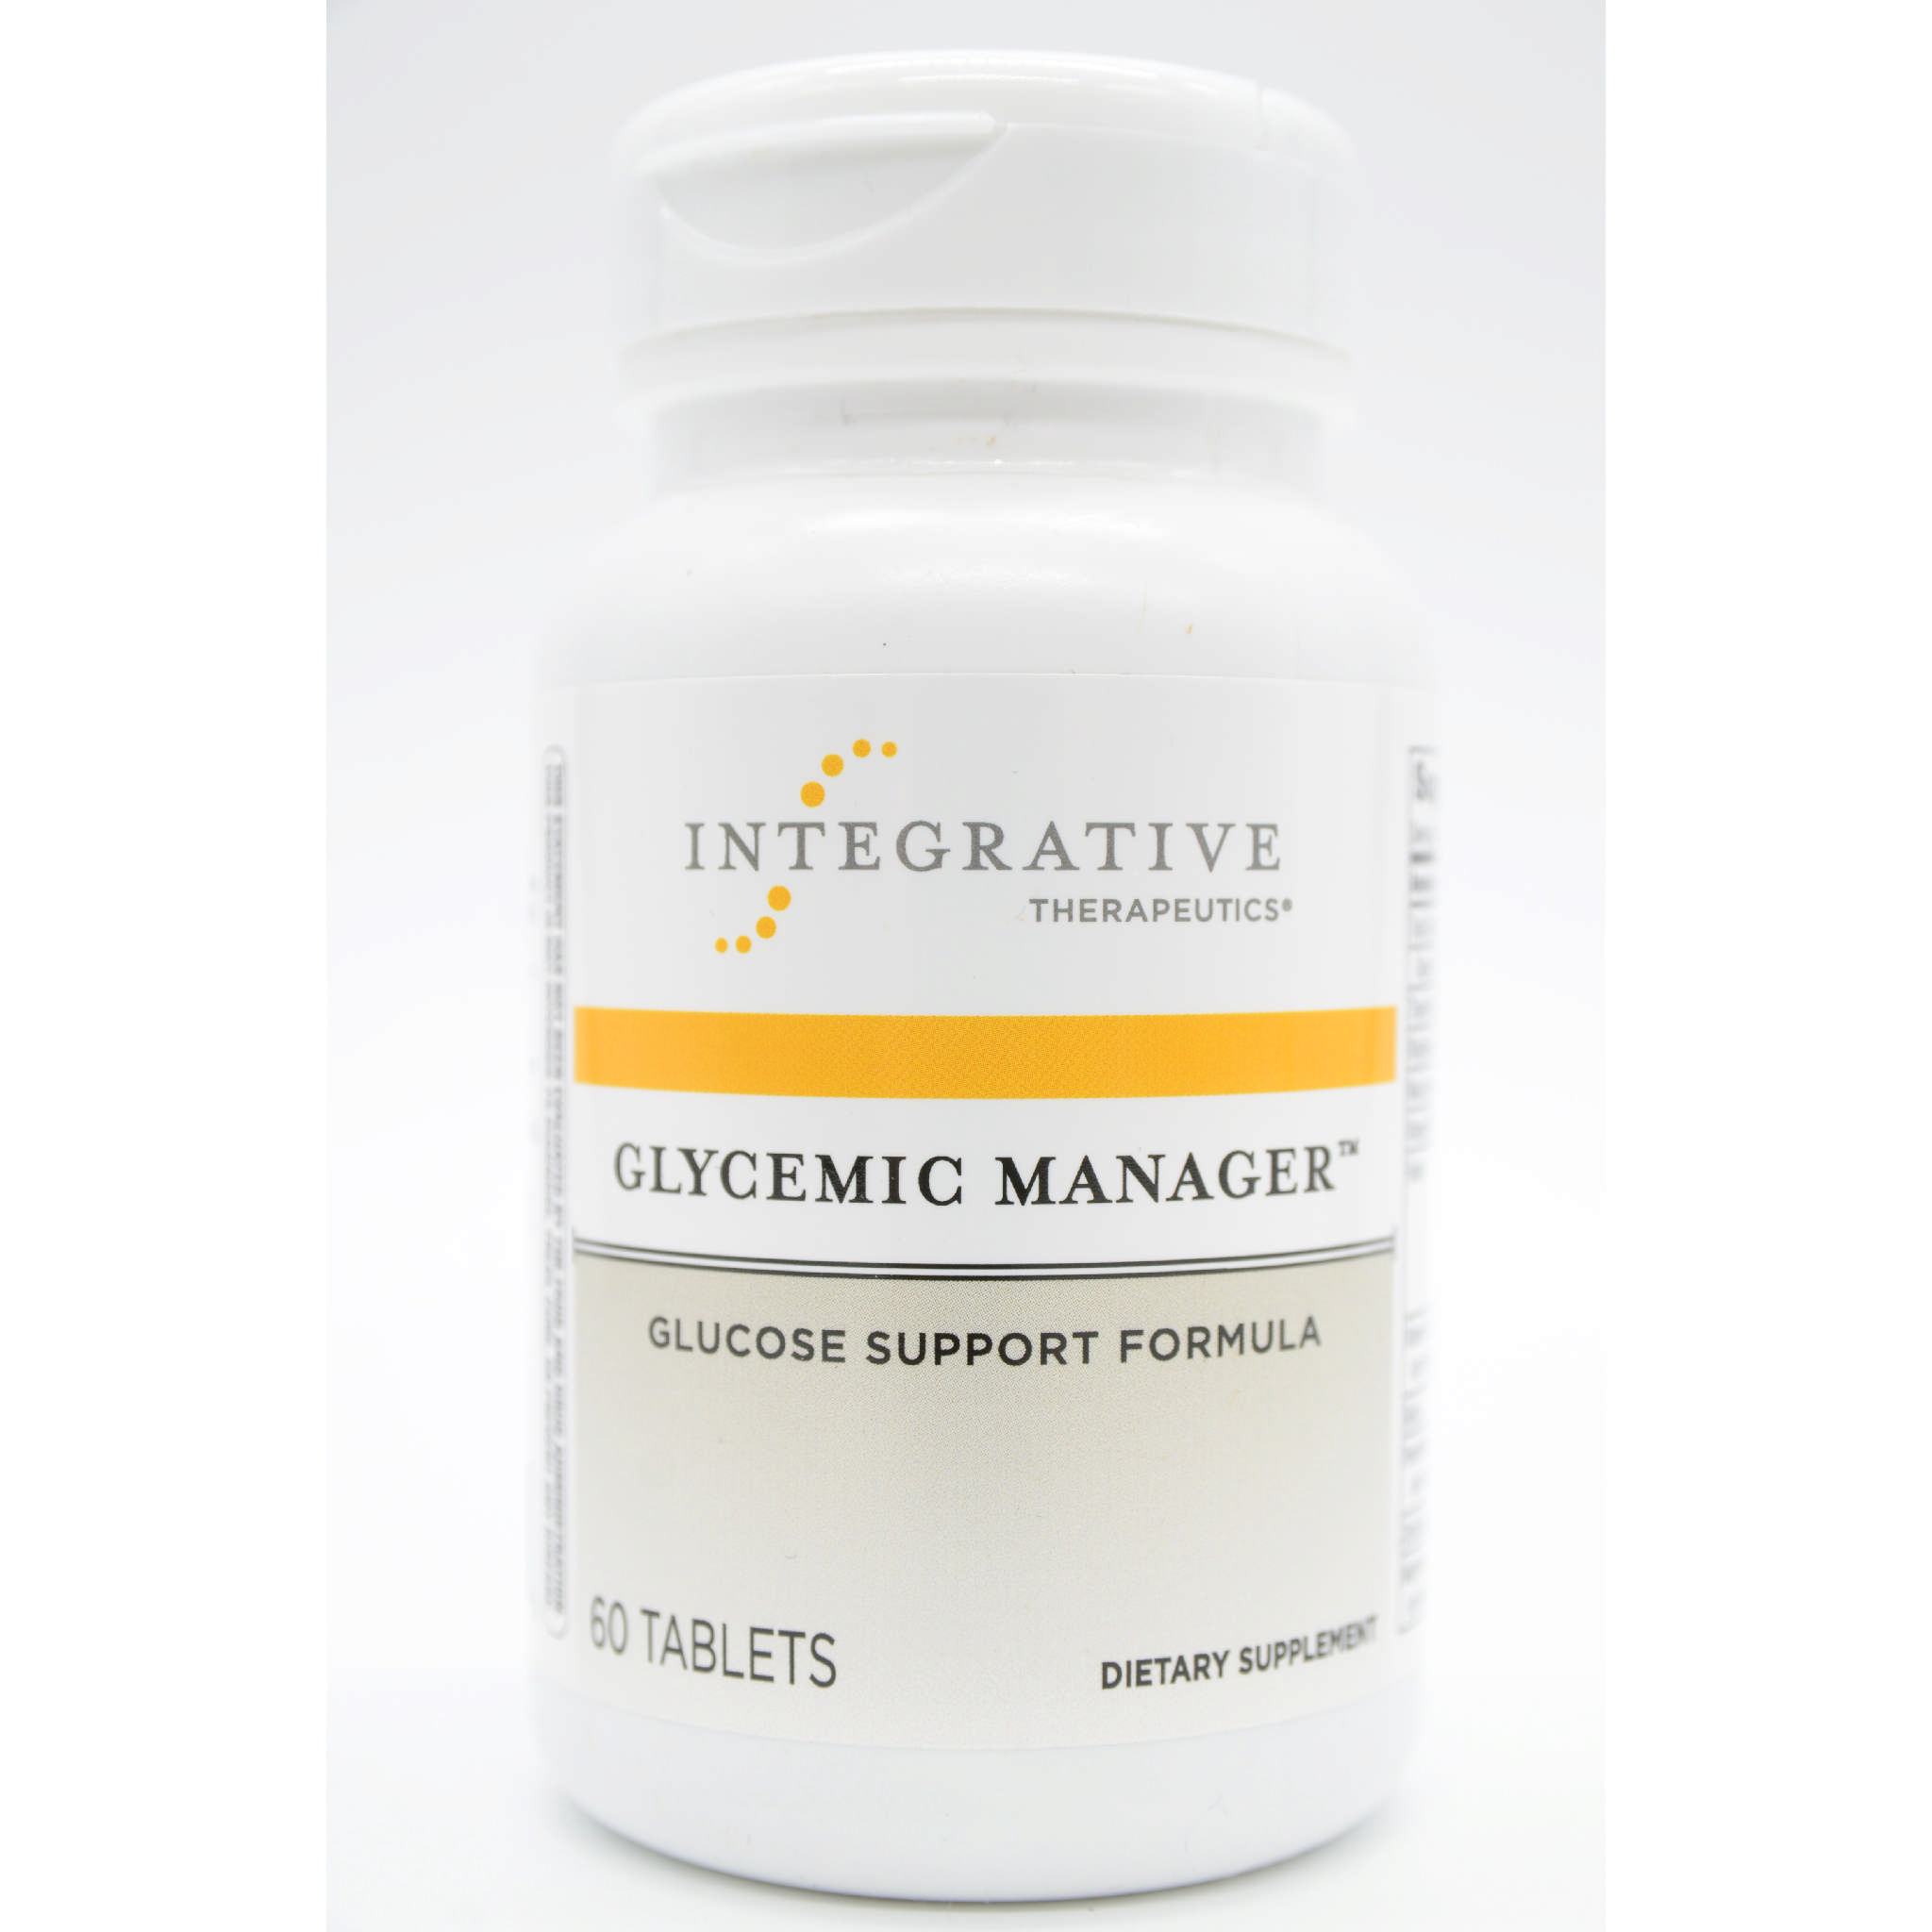 Integrative Therapy - Glycemic Manager